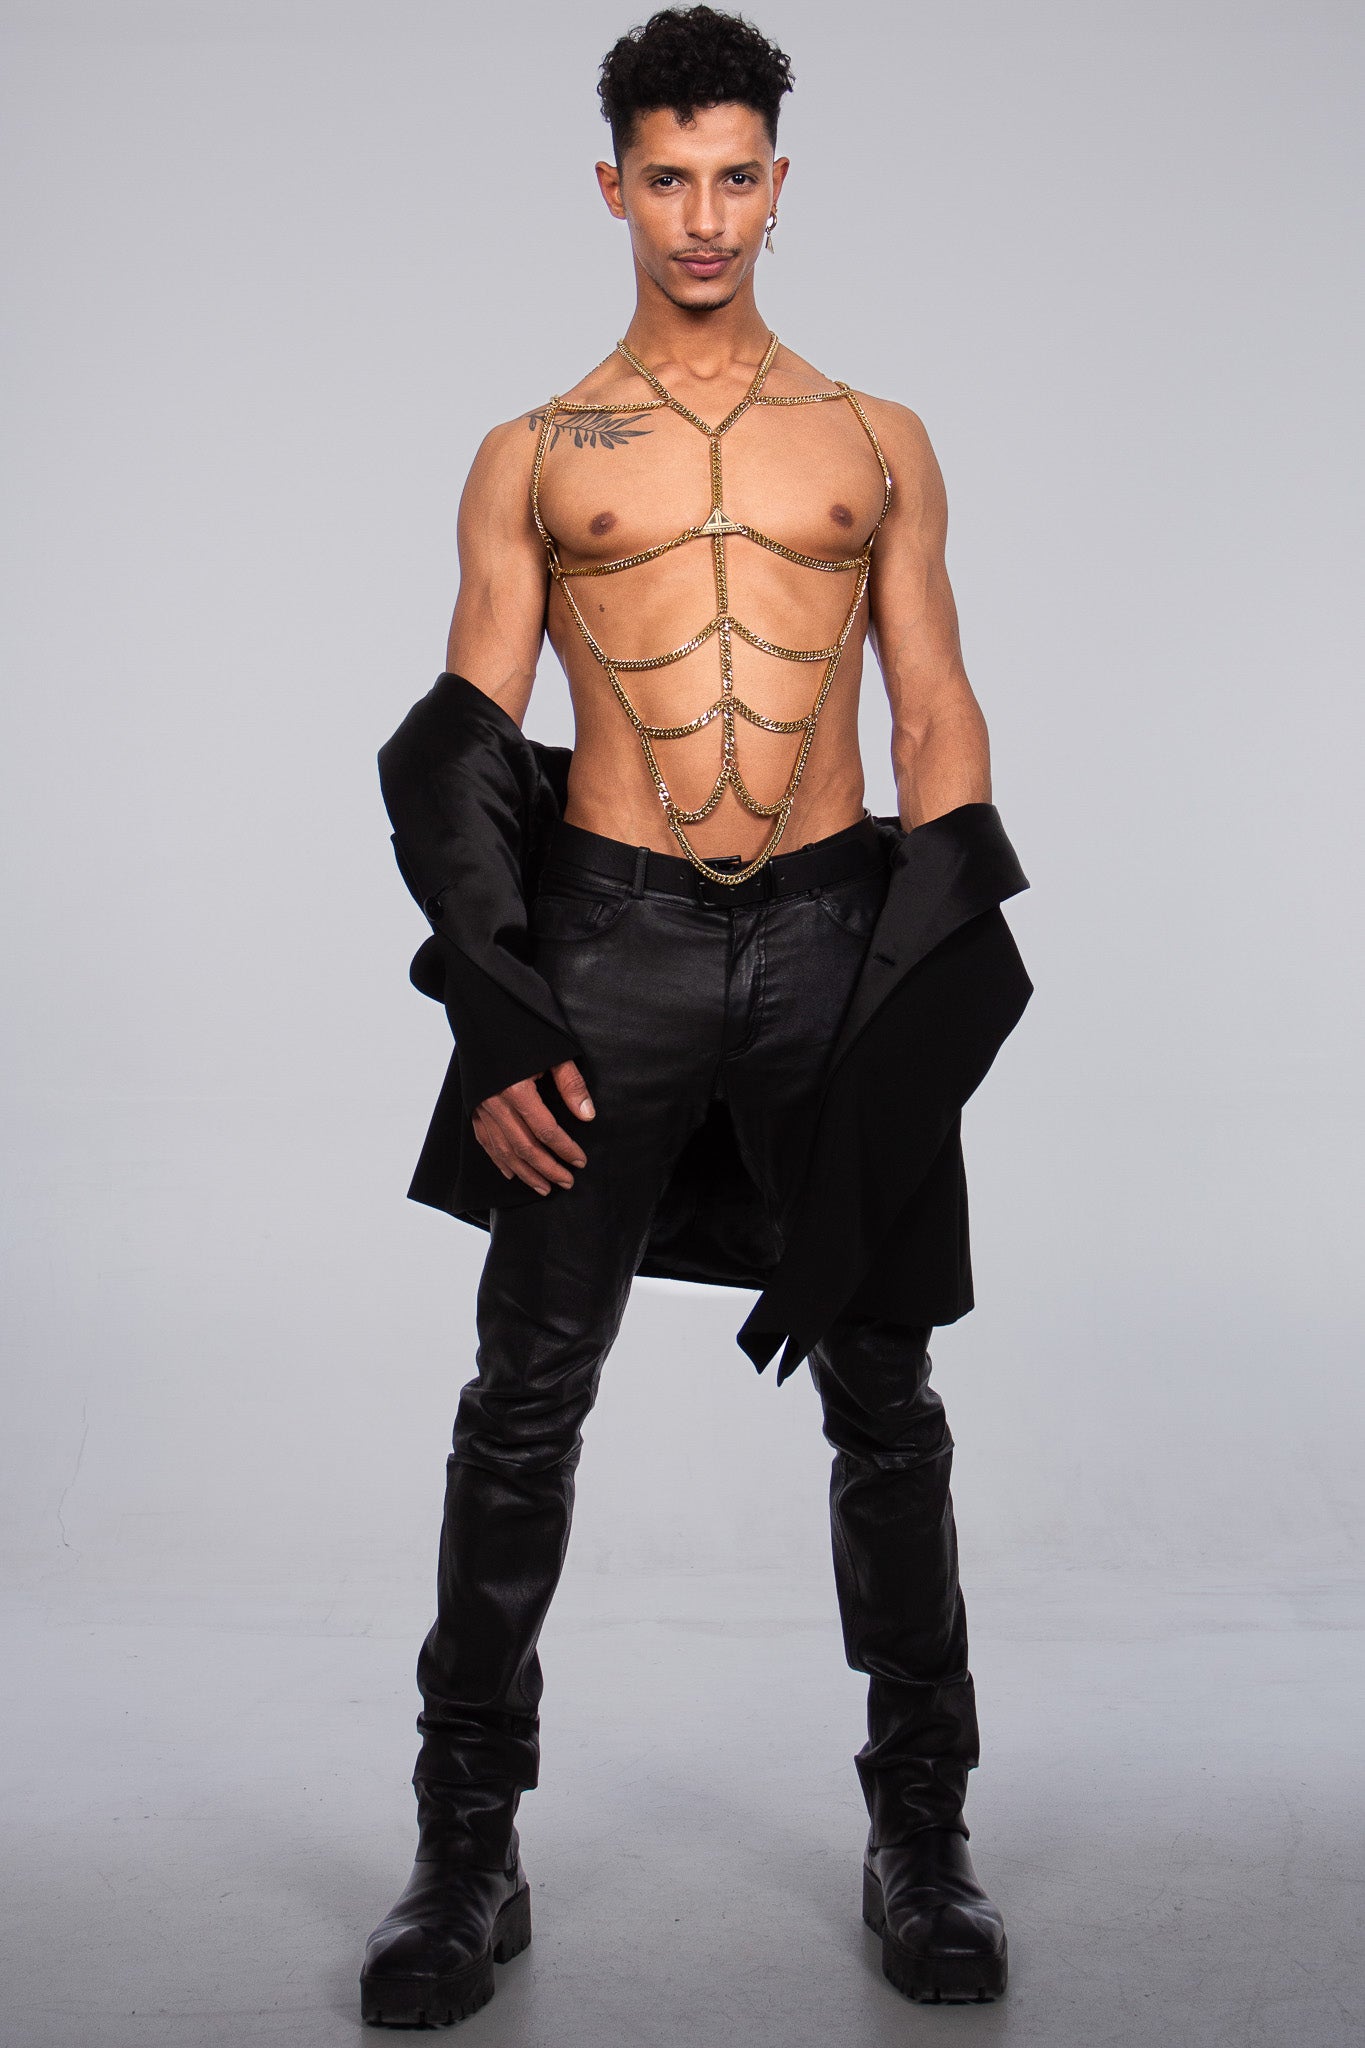 the sparkly gold body chain accessory by Lorand Lajos in this picture is enhancing the shape of the models six pack. the model is topless. He is a masculin, muscular young men.